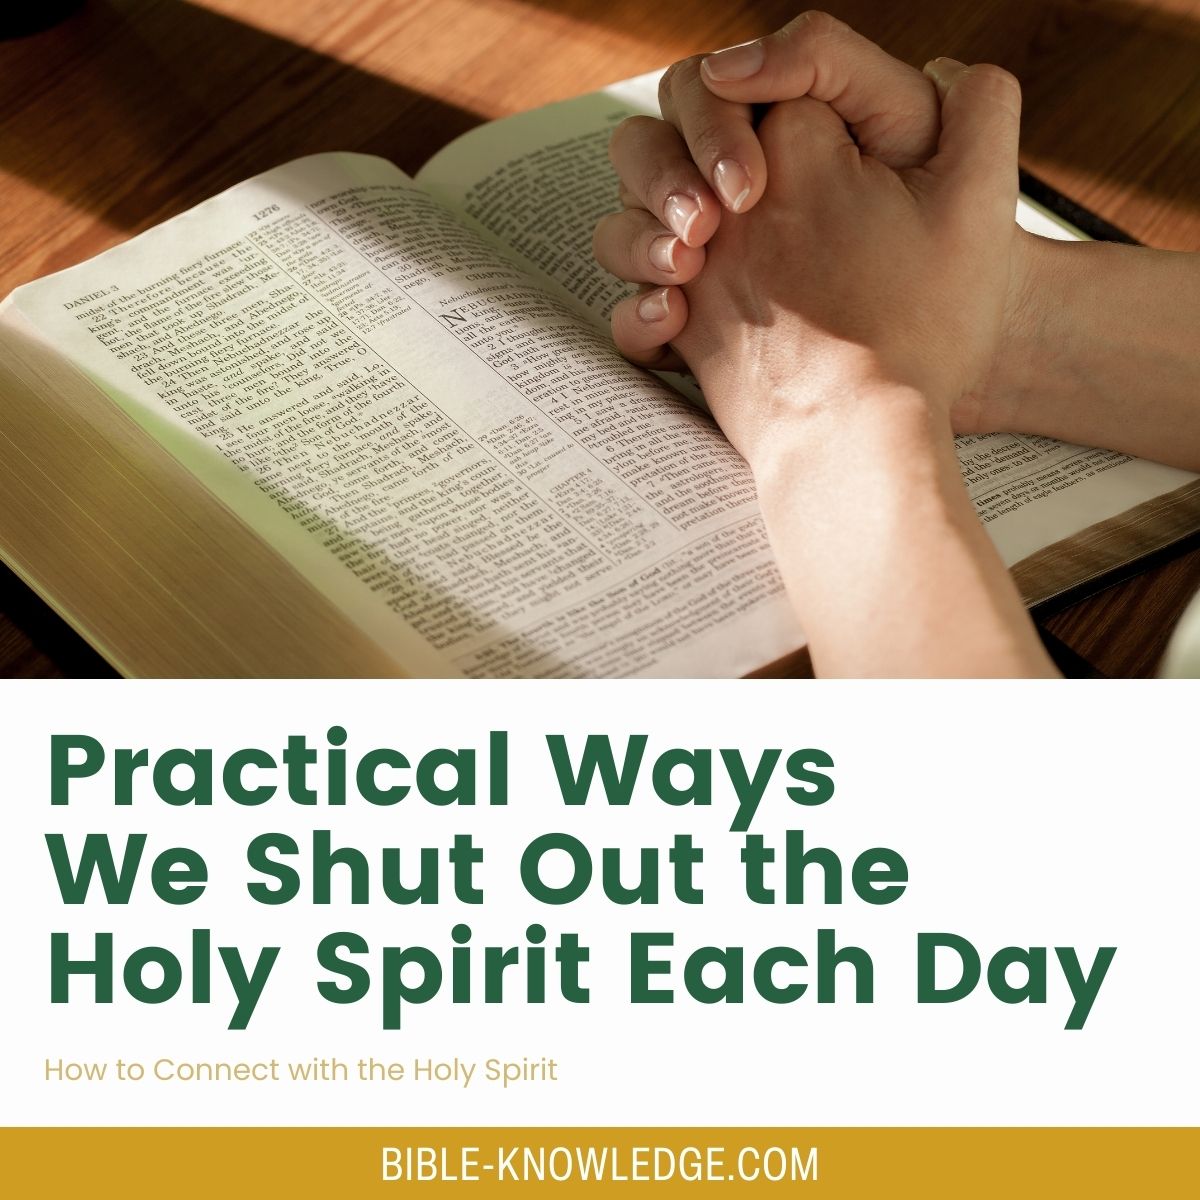 Practical Ways We Shut Out the Holy Spirit Each Day